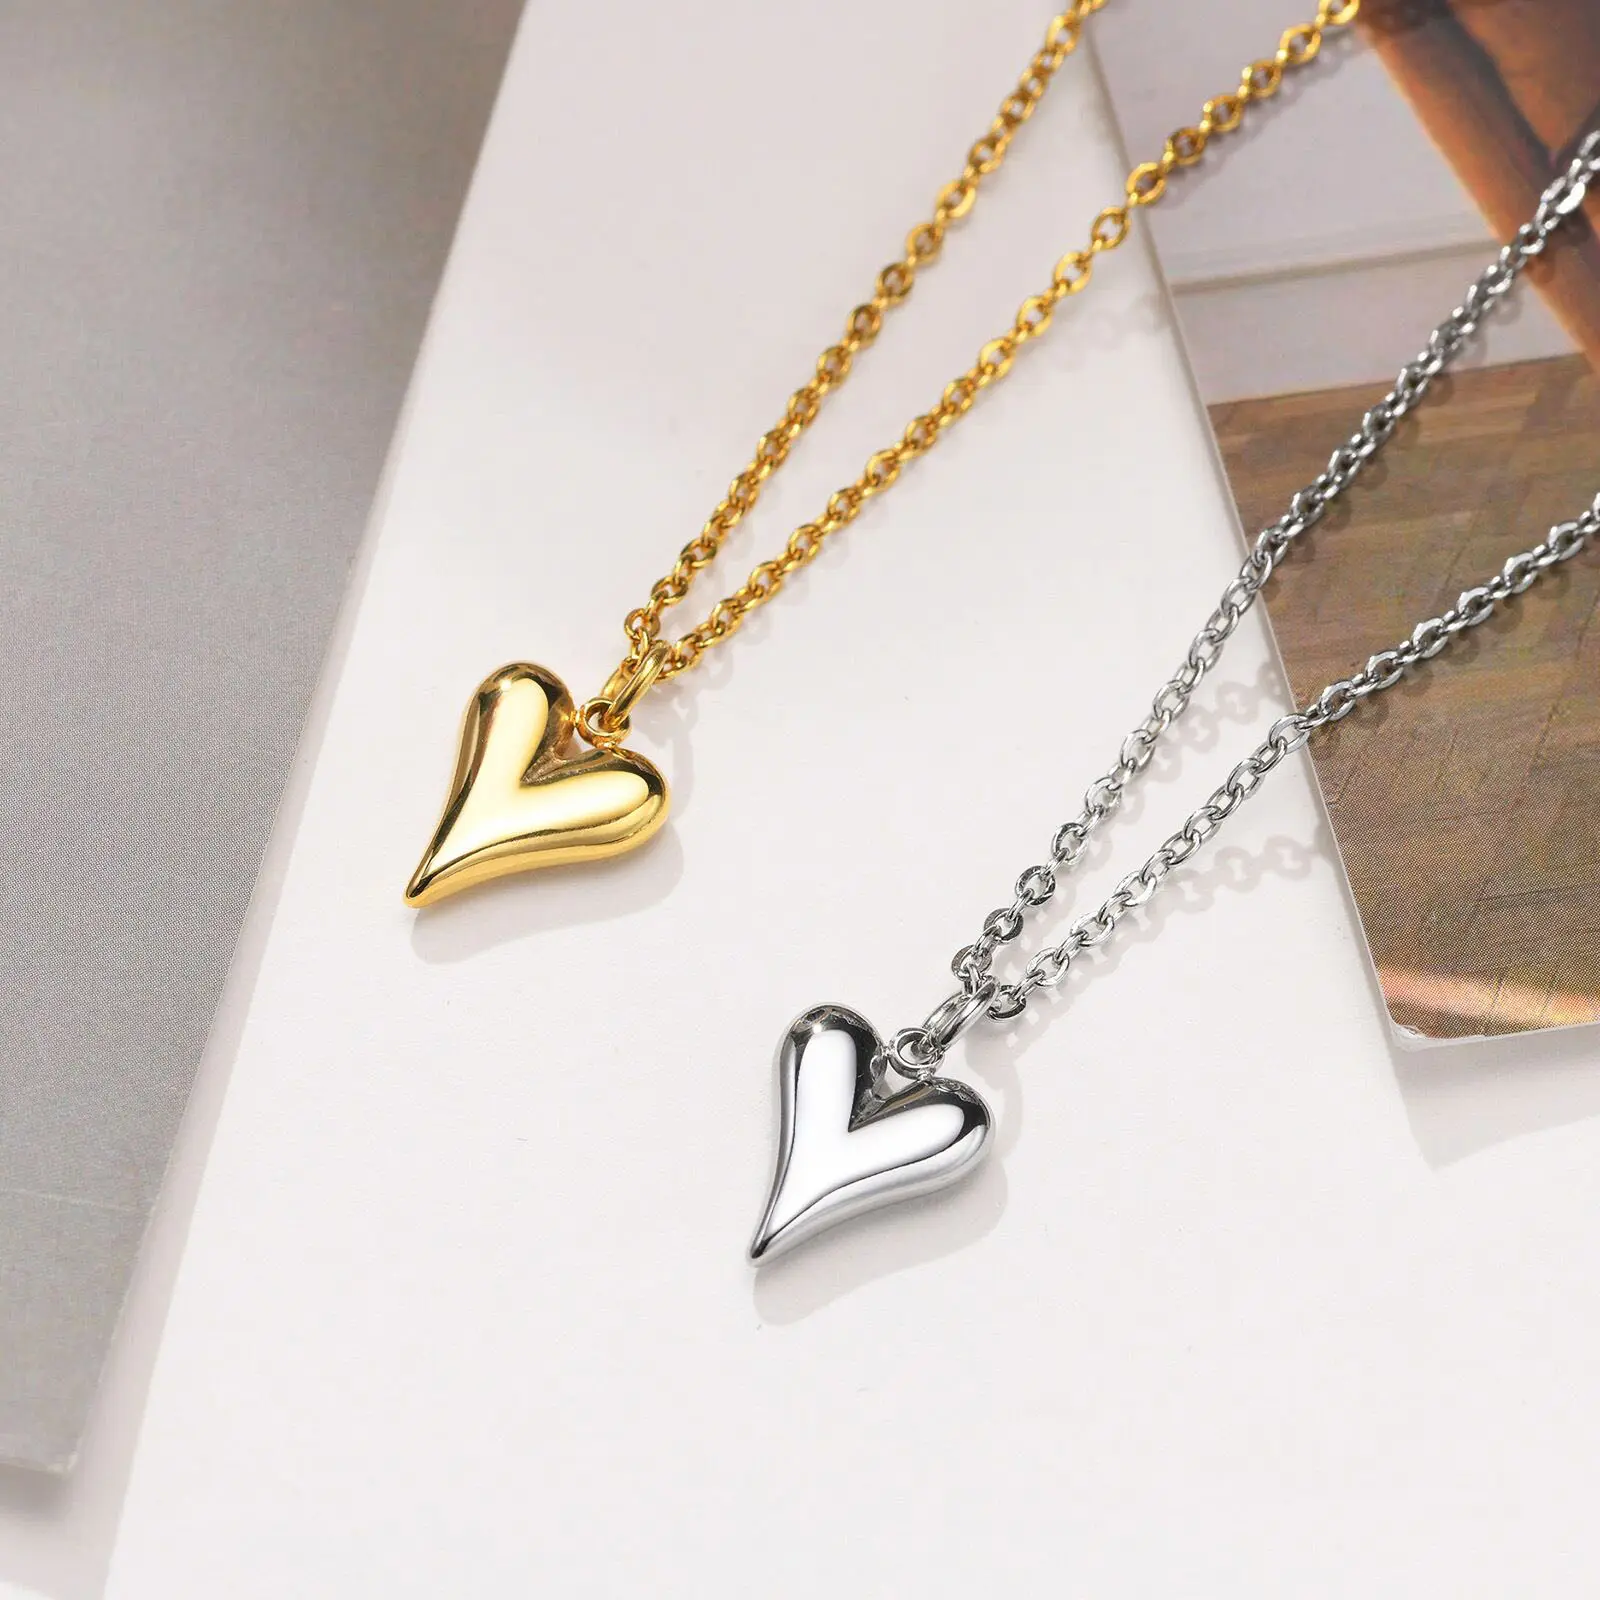 Fashion Gold Chain Necklace Jewelry Stainless Steel Dainty Tiny Love Heart Charm Women Heart Shaped Choker Pendant Necklace